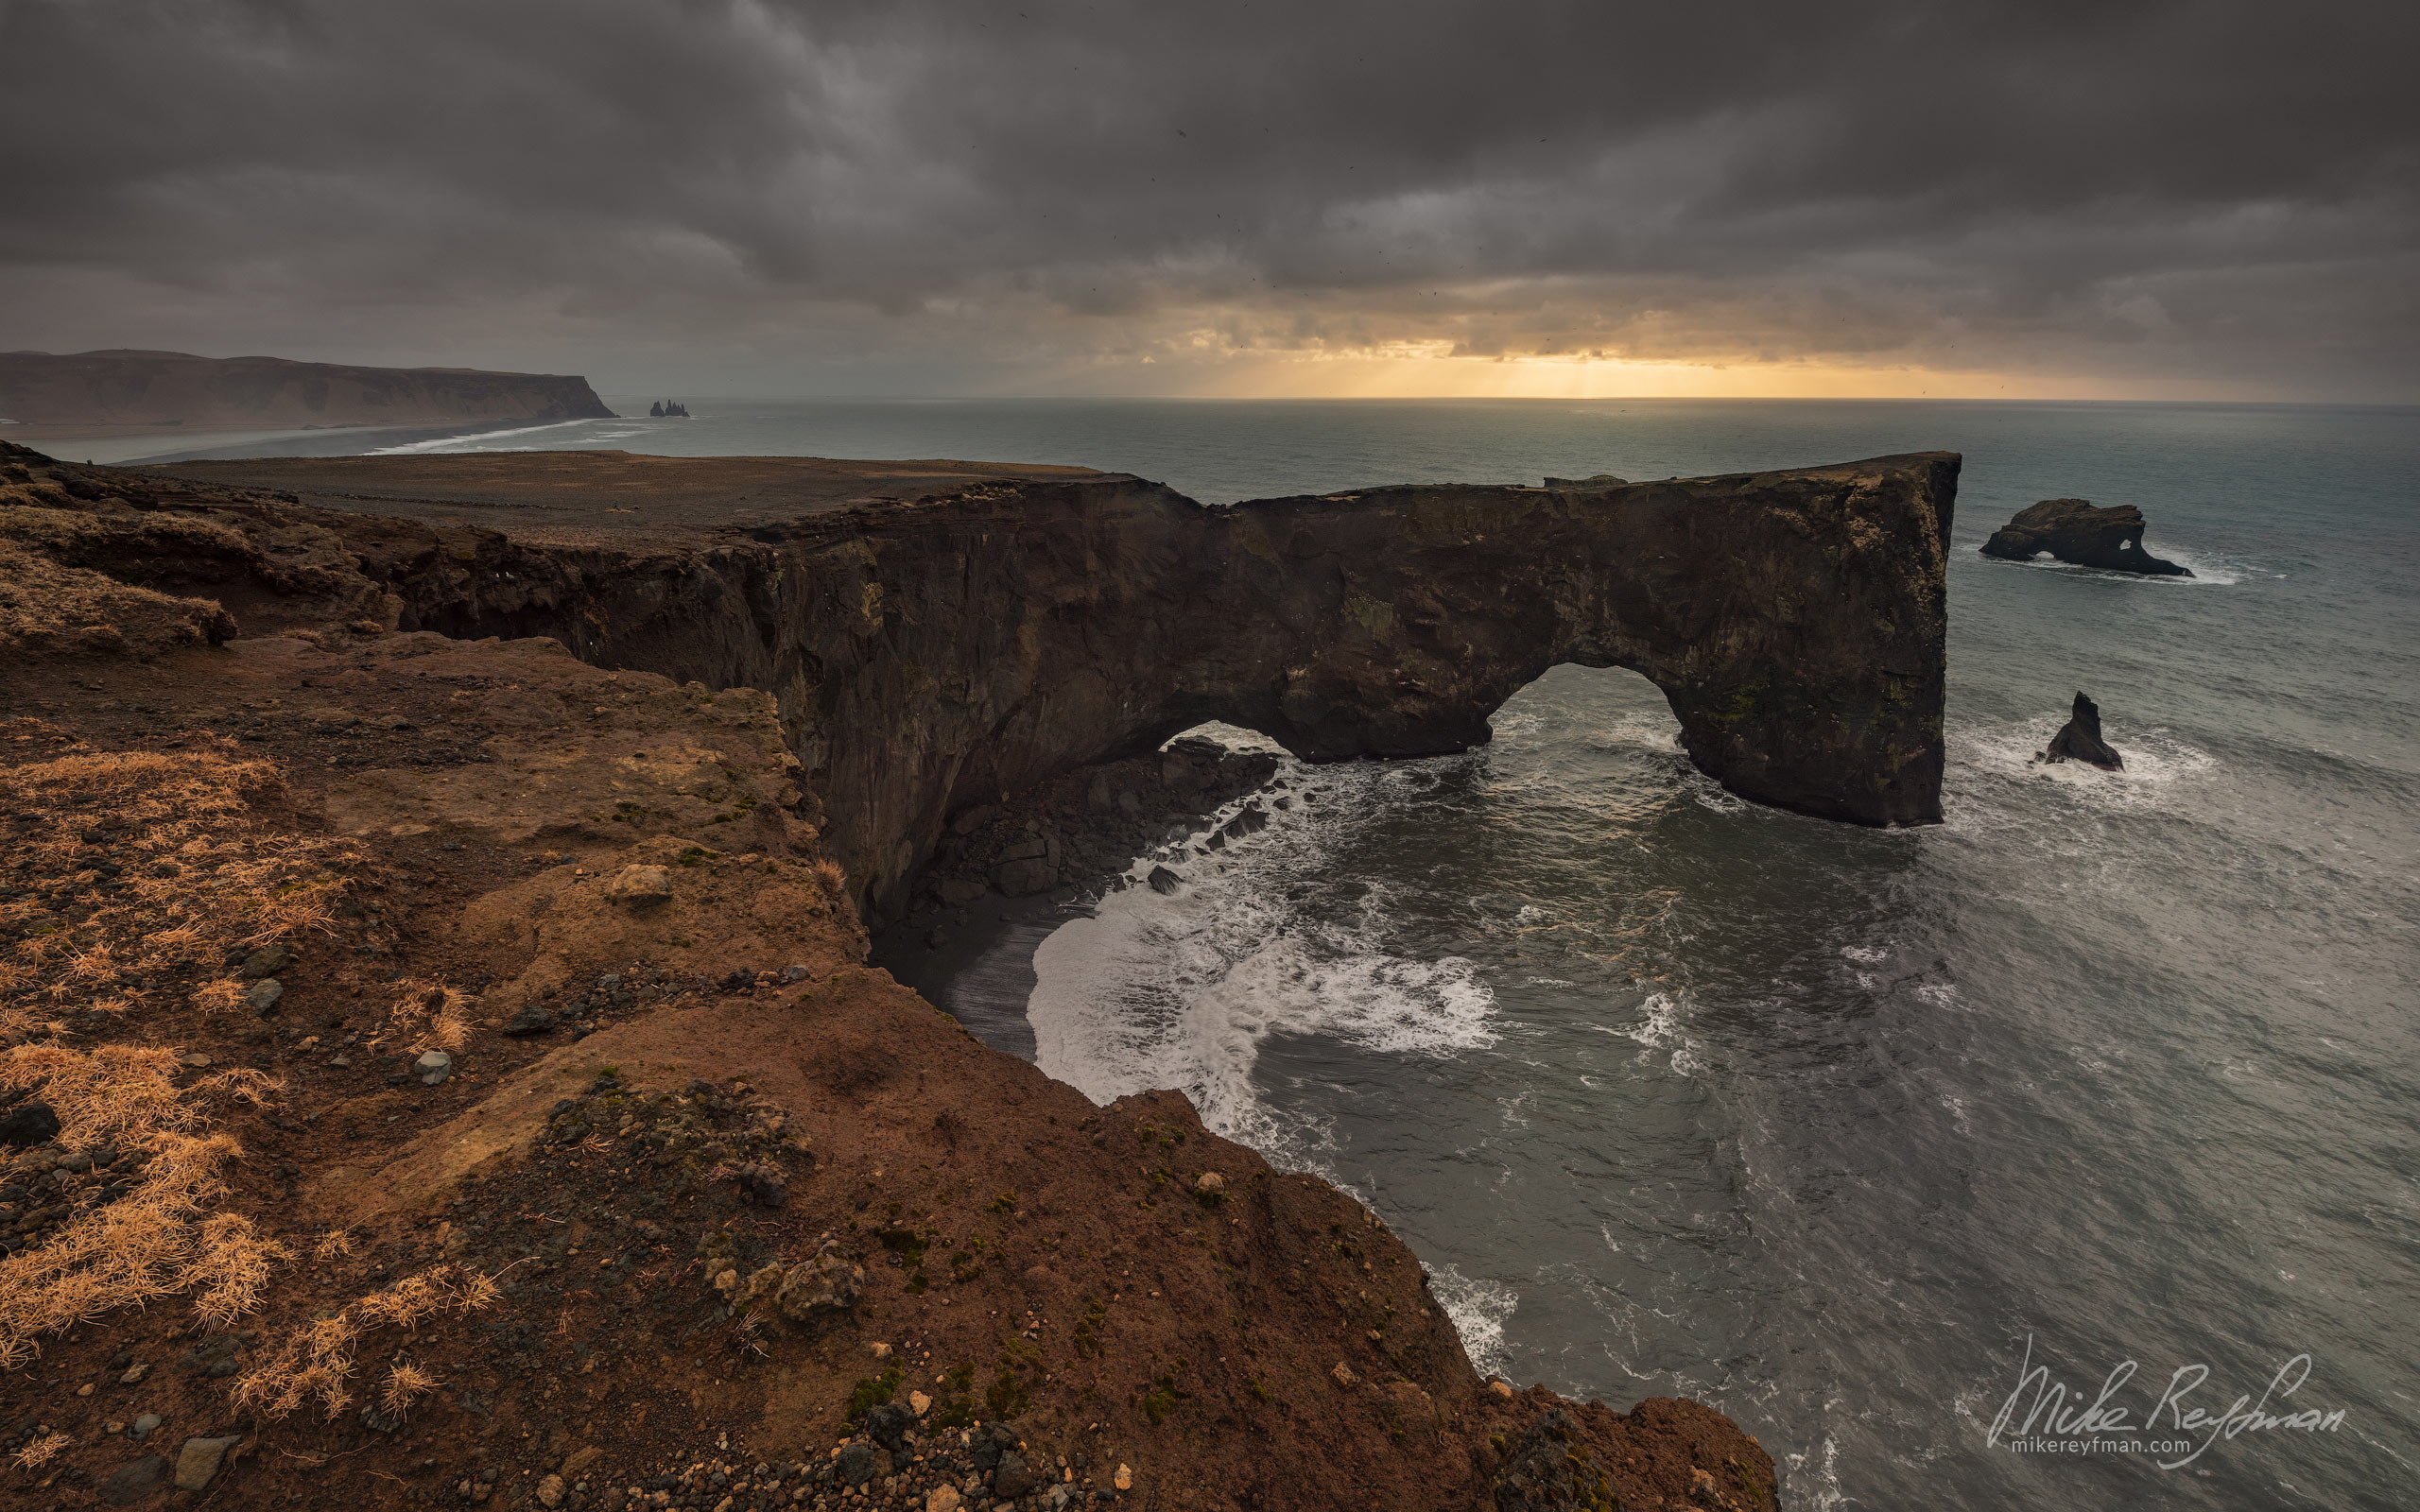 Cape Dyrholaey (Door Hill), Southern Iceland. 028-IC-CL_10P2571 - Where Lava Meets the Ocean. Iceland coastline. - Mike Reyfman Photography